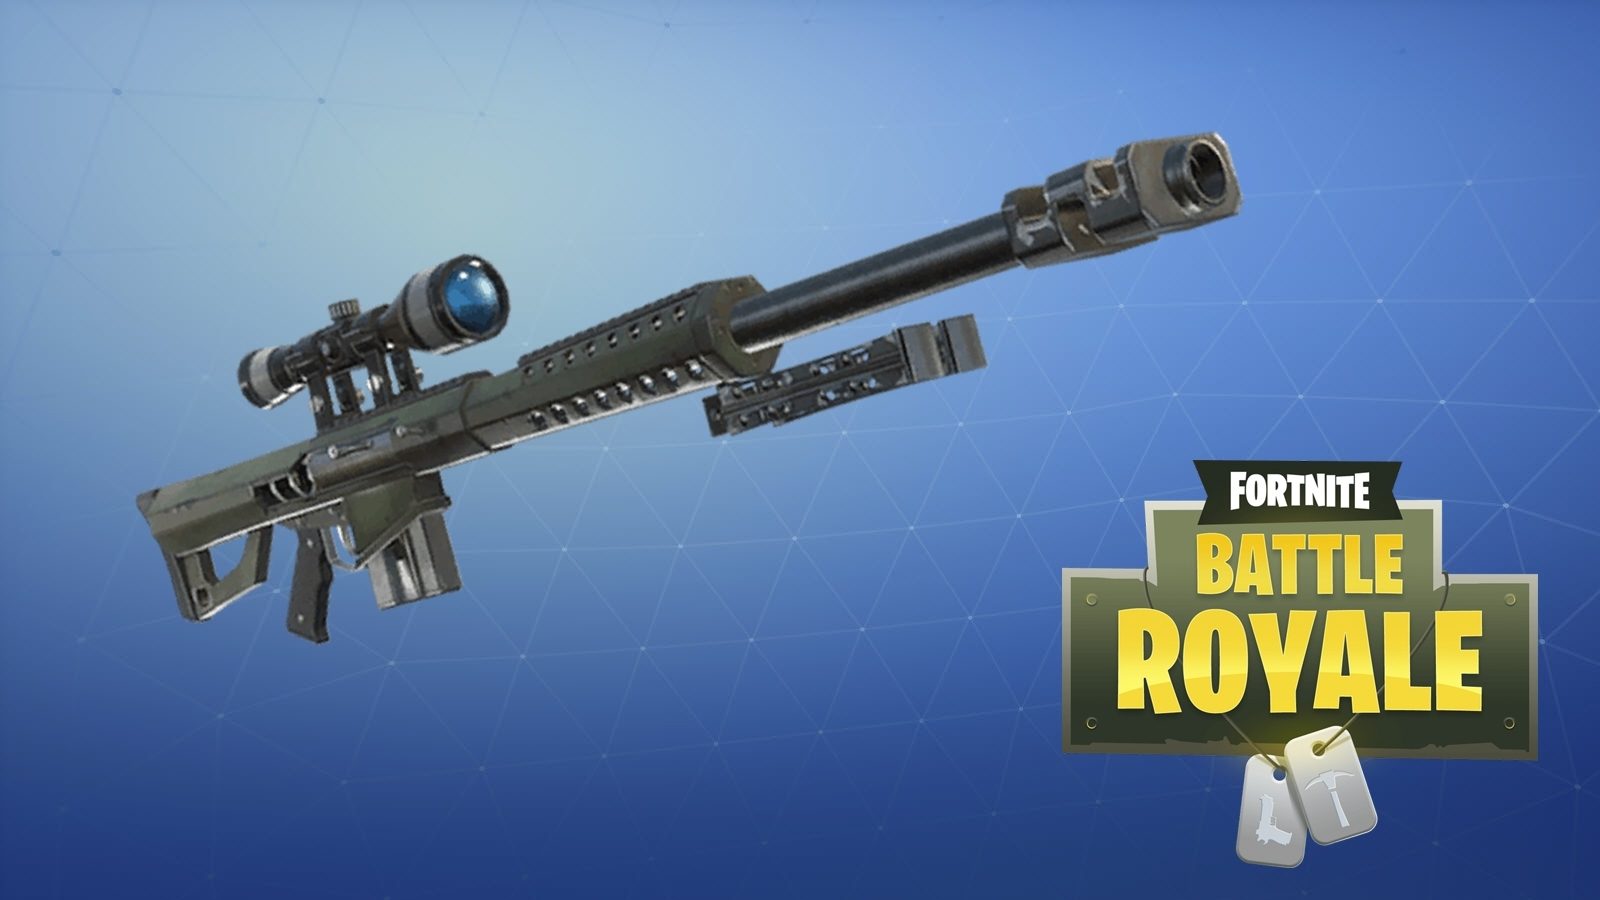 Fortnite Battle Royale Is Going To Get Upgrade With New Rifle